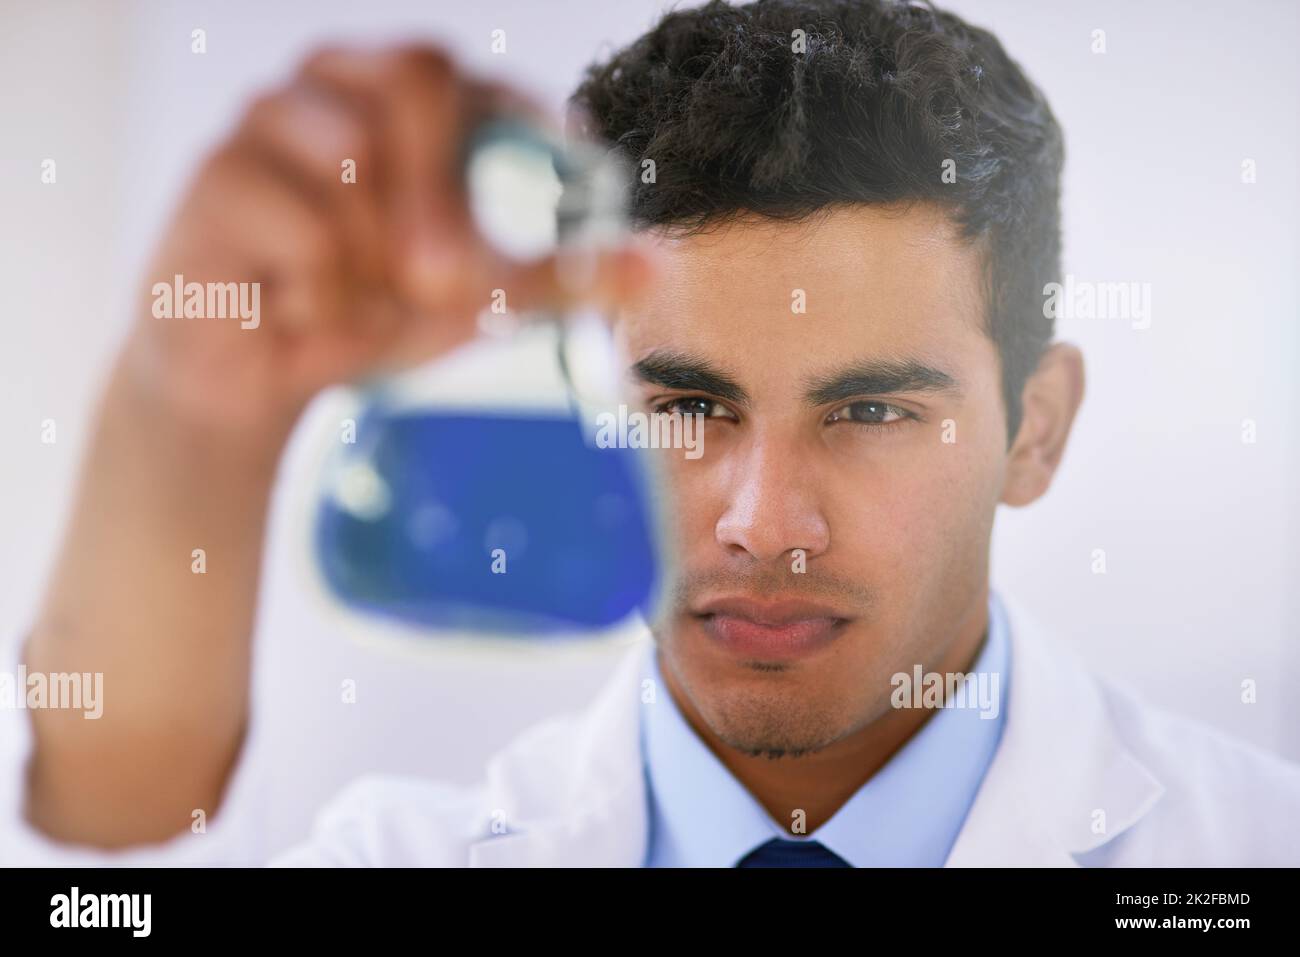 Scrutinizing samples. Shot of a lab technician examining a beaker of blue liquid while standing in a lab. Stock Photo